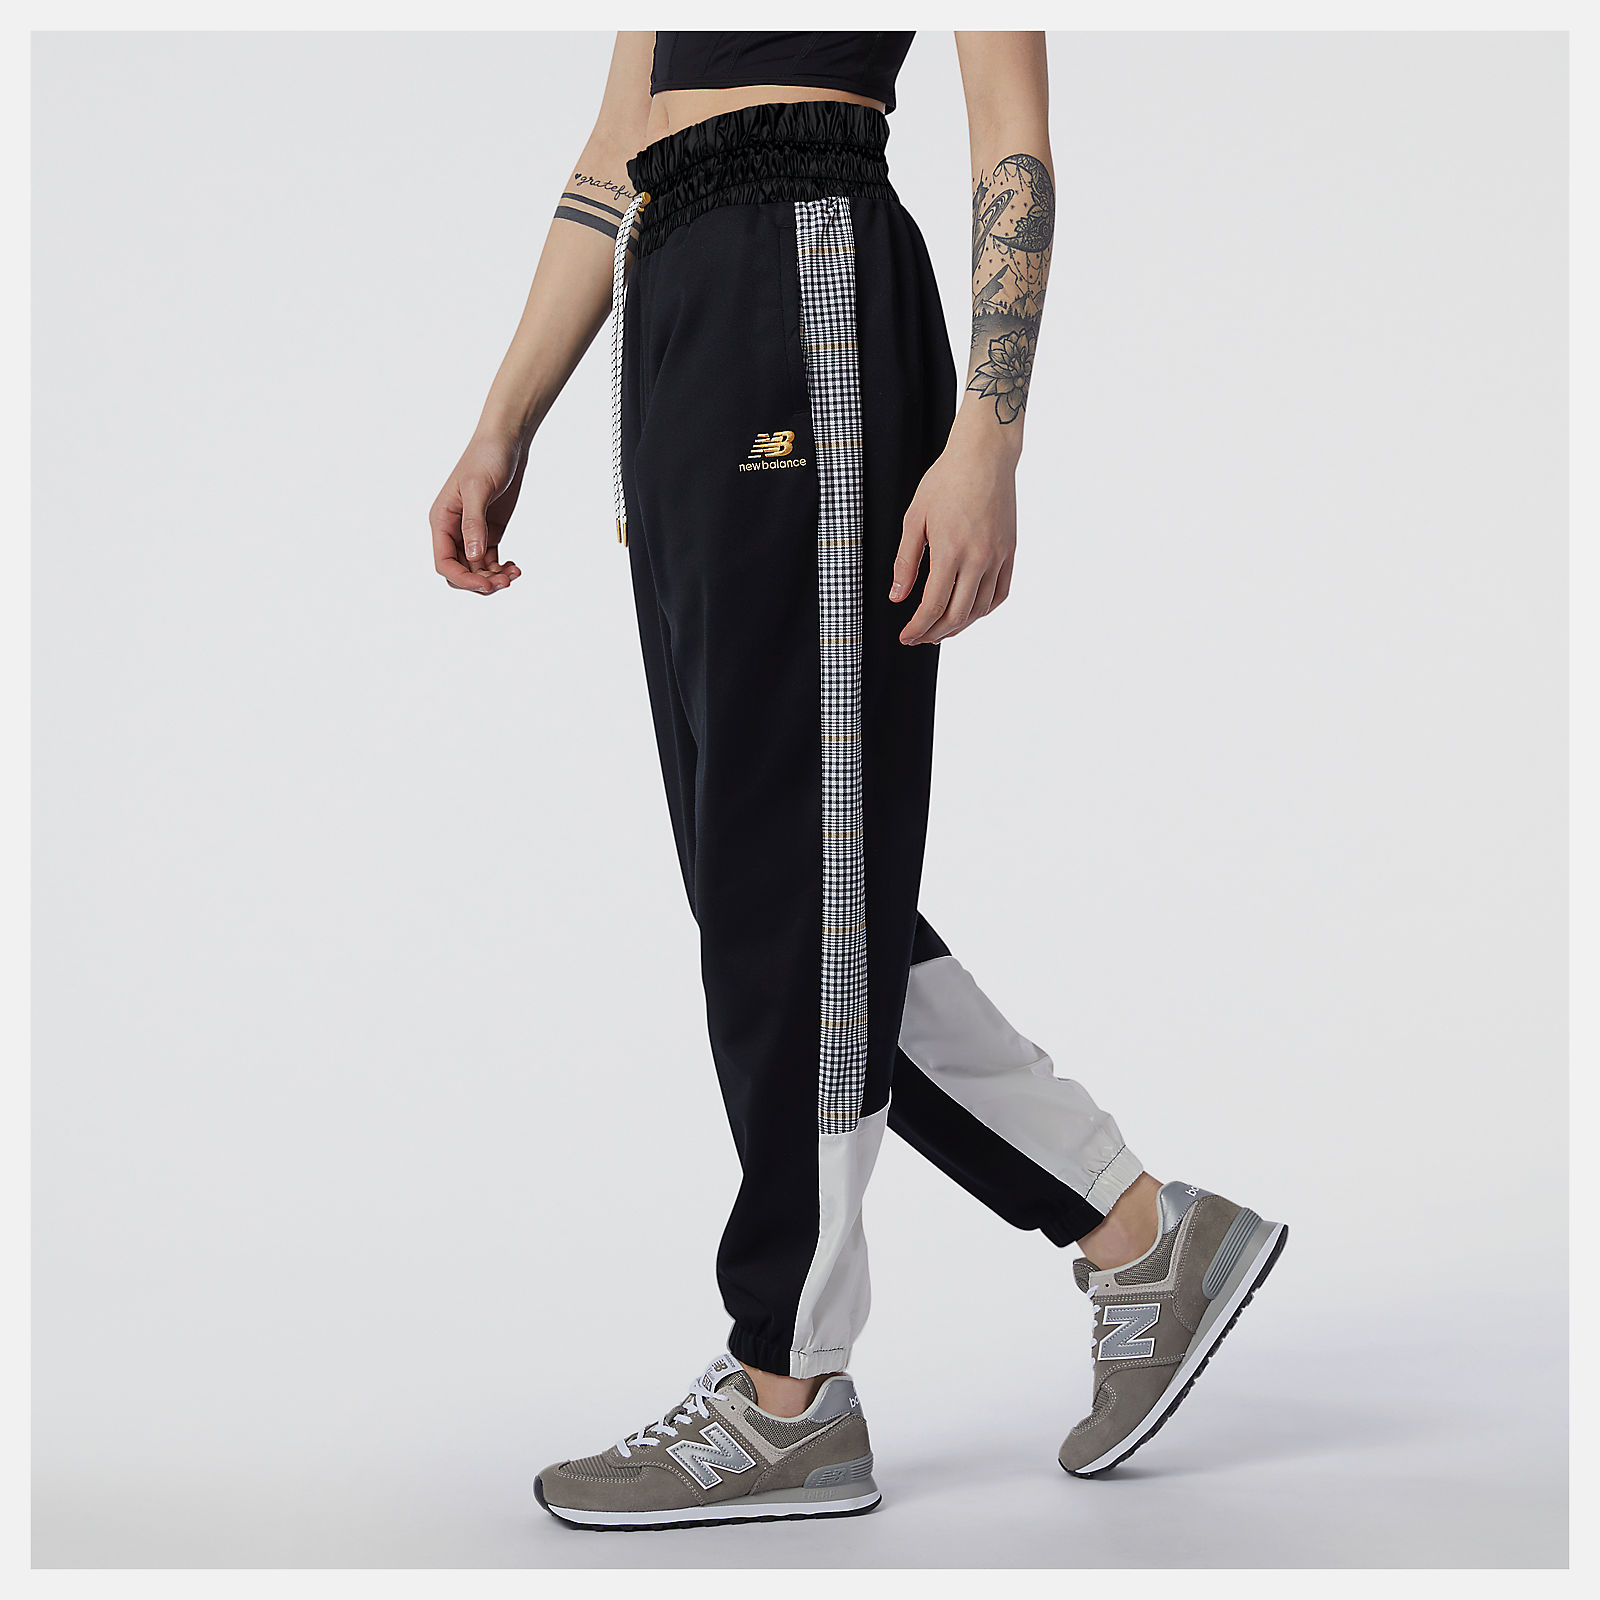 New Balance Nb Athletics Higher Learning Stripe Track Pant in Black Slacks and Chinos Straight-leg trousers Save 33% Womens Clothing Trousers 